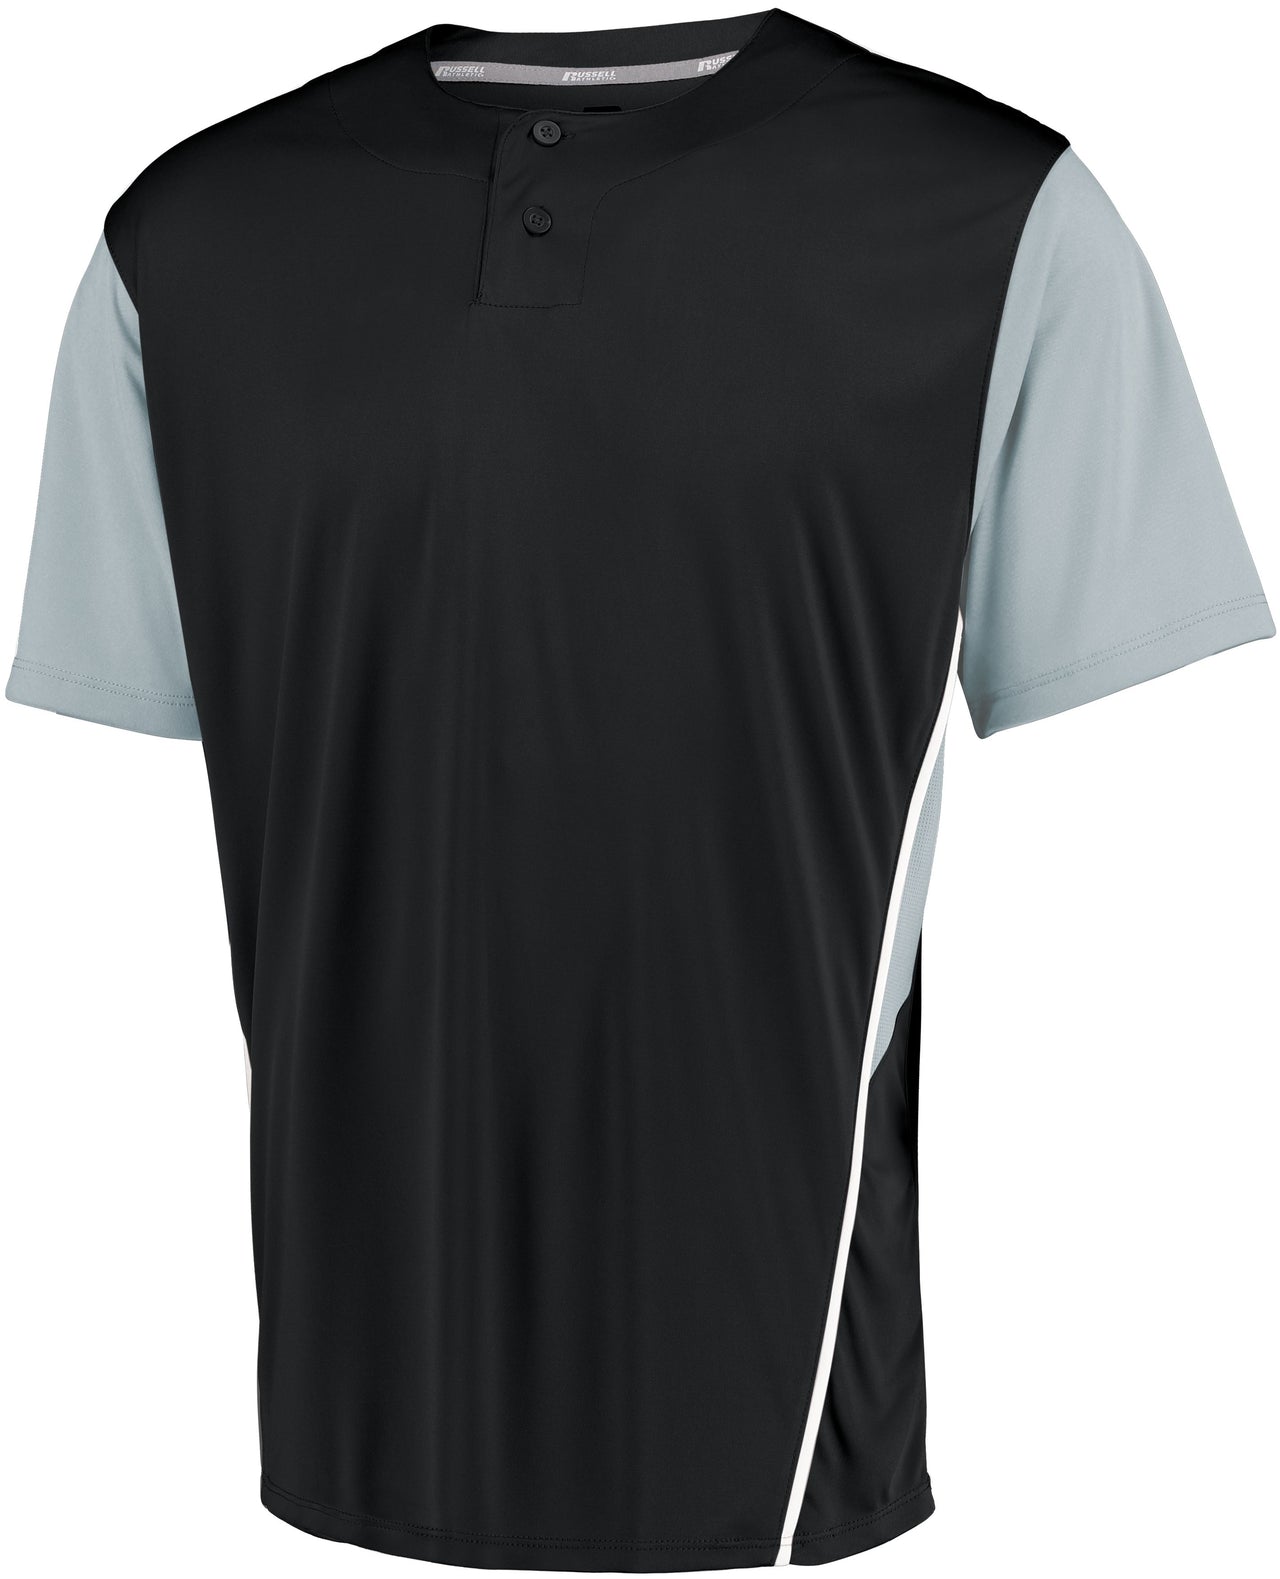 Youth Two-Button Placket Jersey - 3R6X2B